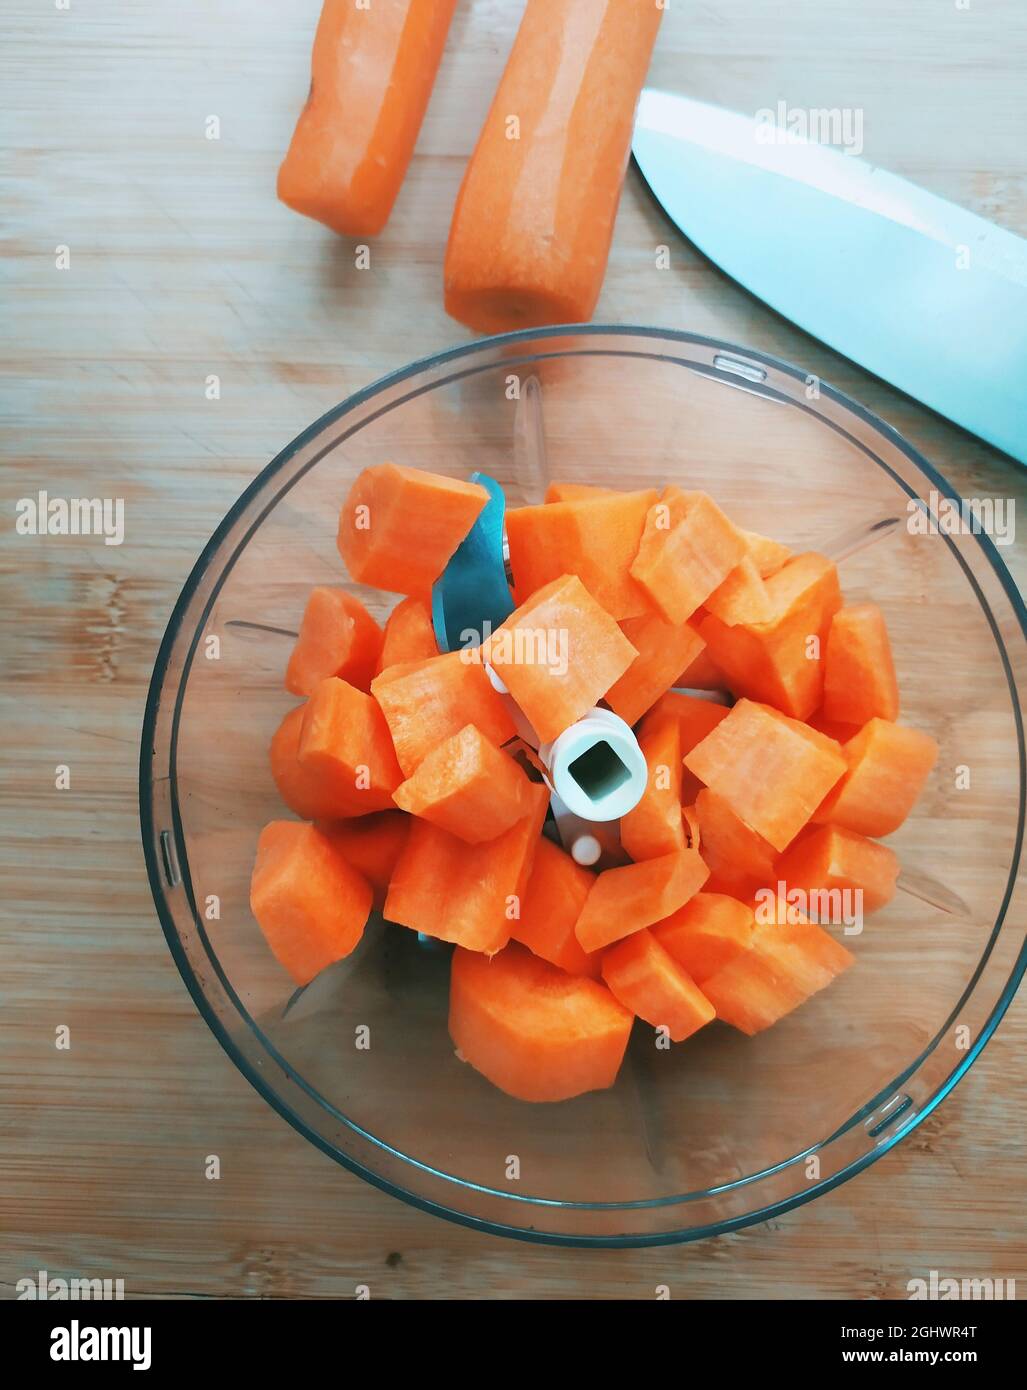 https://c8.alamy.com/comp/2GHWR4T/carrots-being-chopped-in-a-food-processor-2GHWR4T.jpg